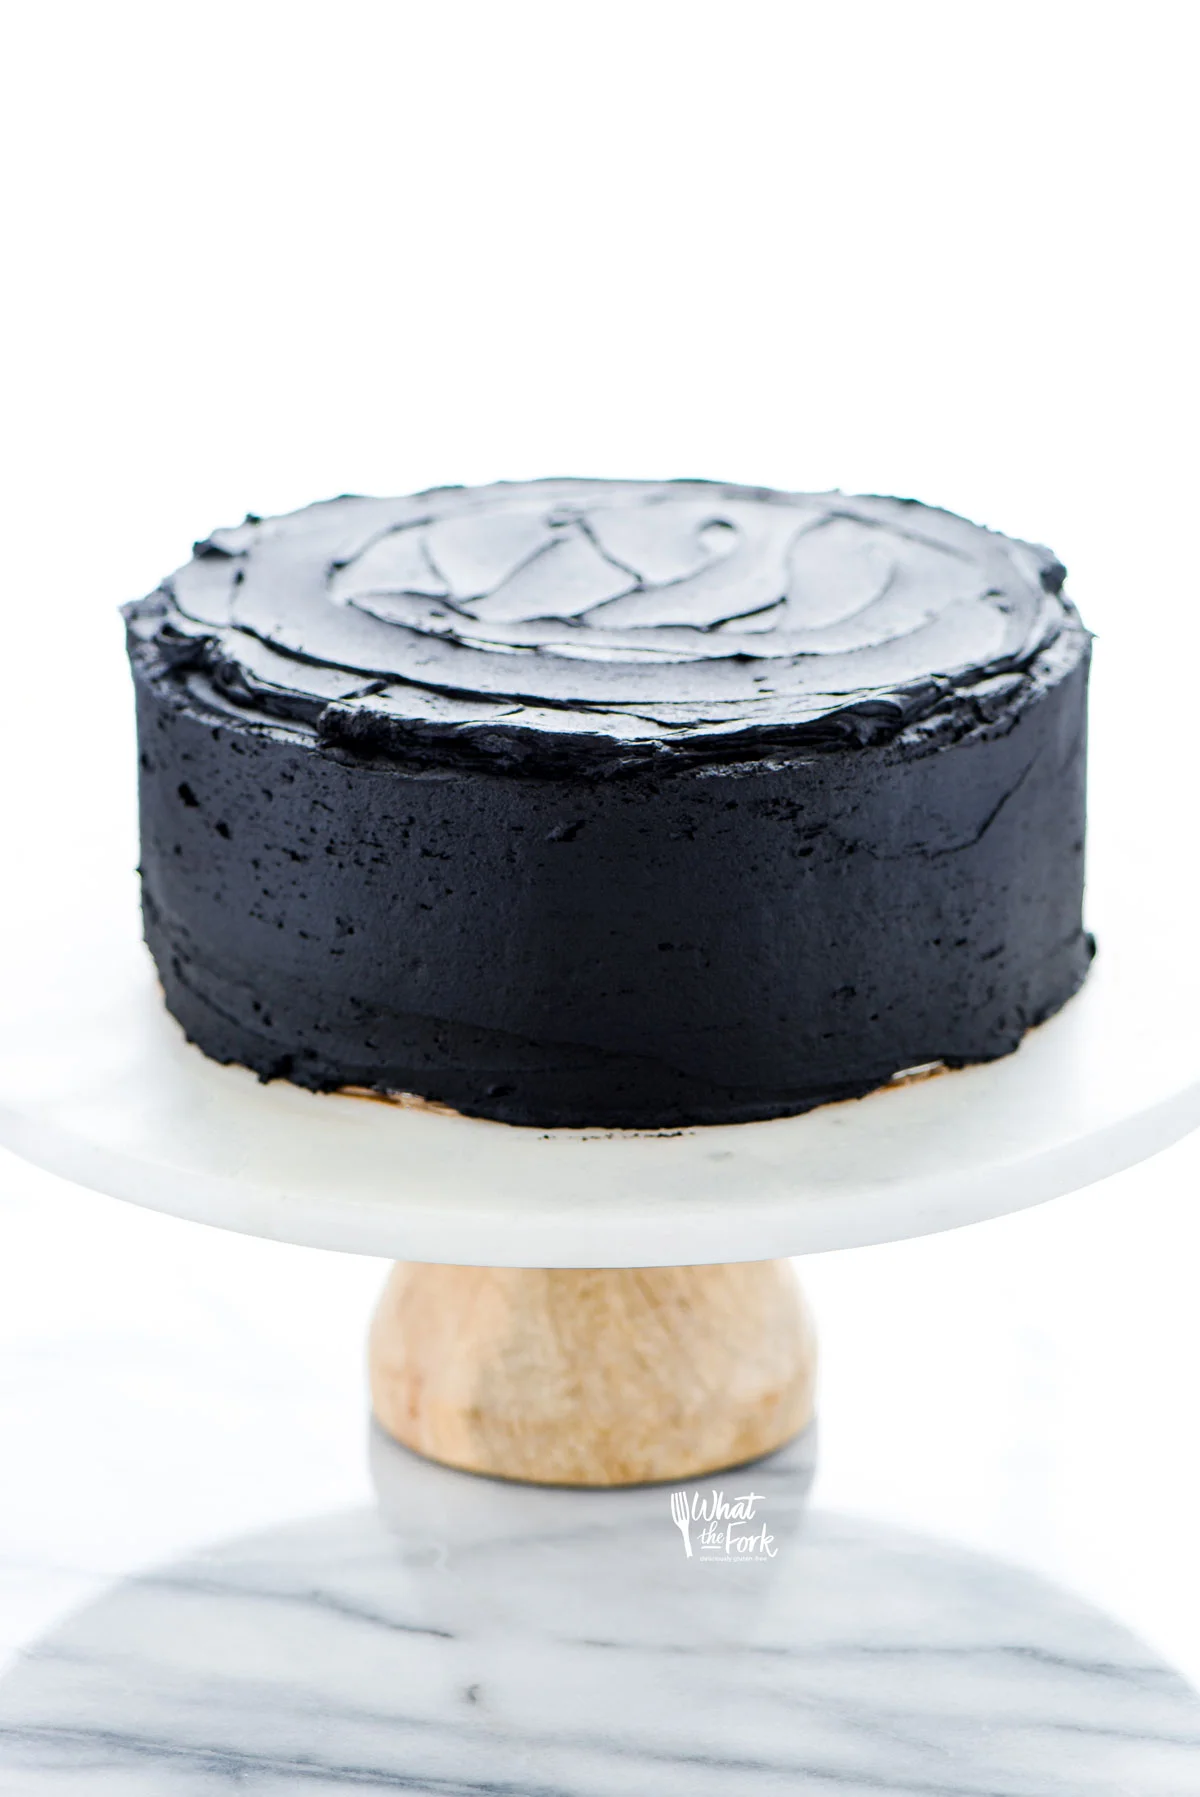 a gluten free black velvet cake frosted with black buttercream on a white marble cake stand with a wood base